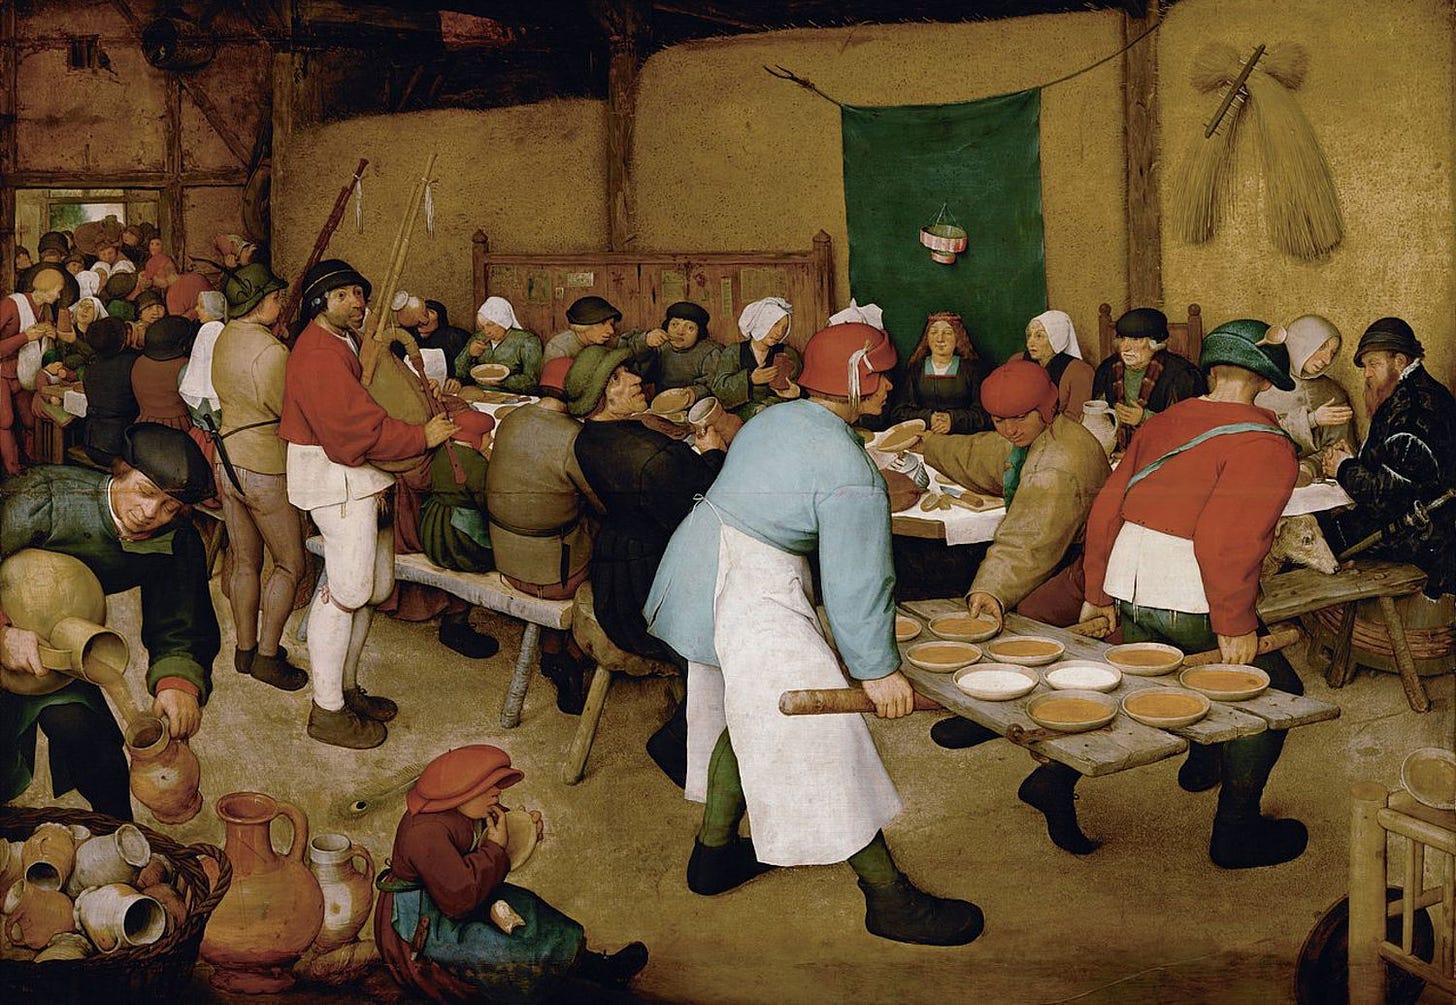 Art History for Kids – Discussing the idea of community as seen in famous paintings.